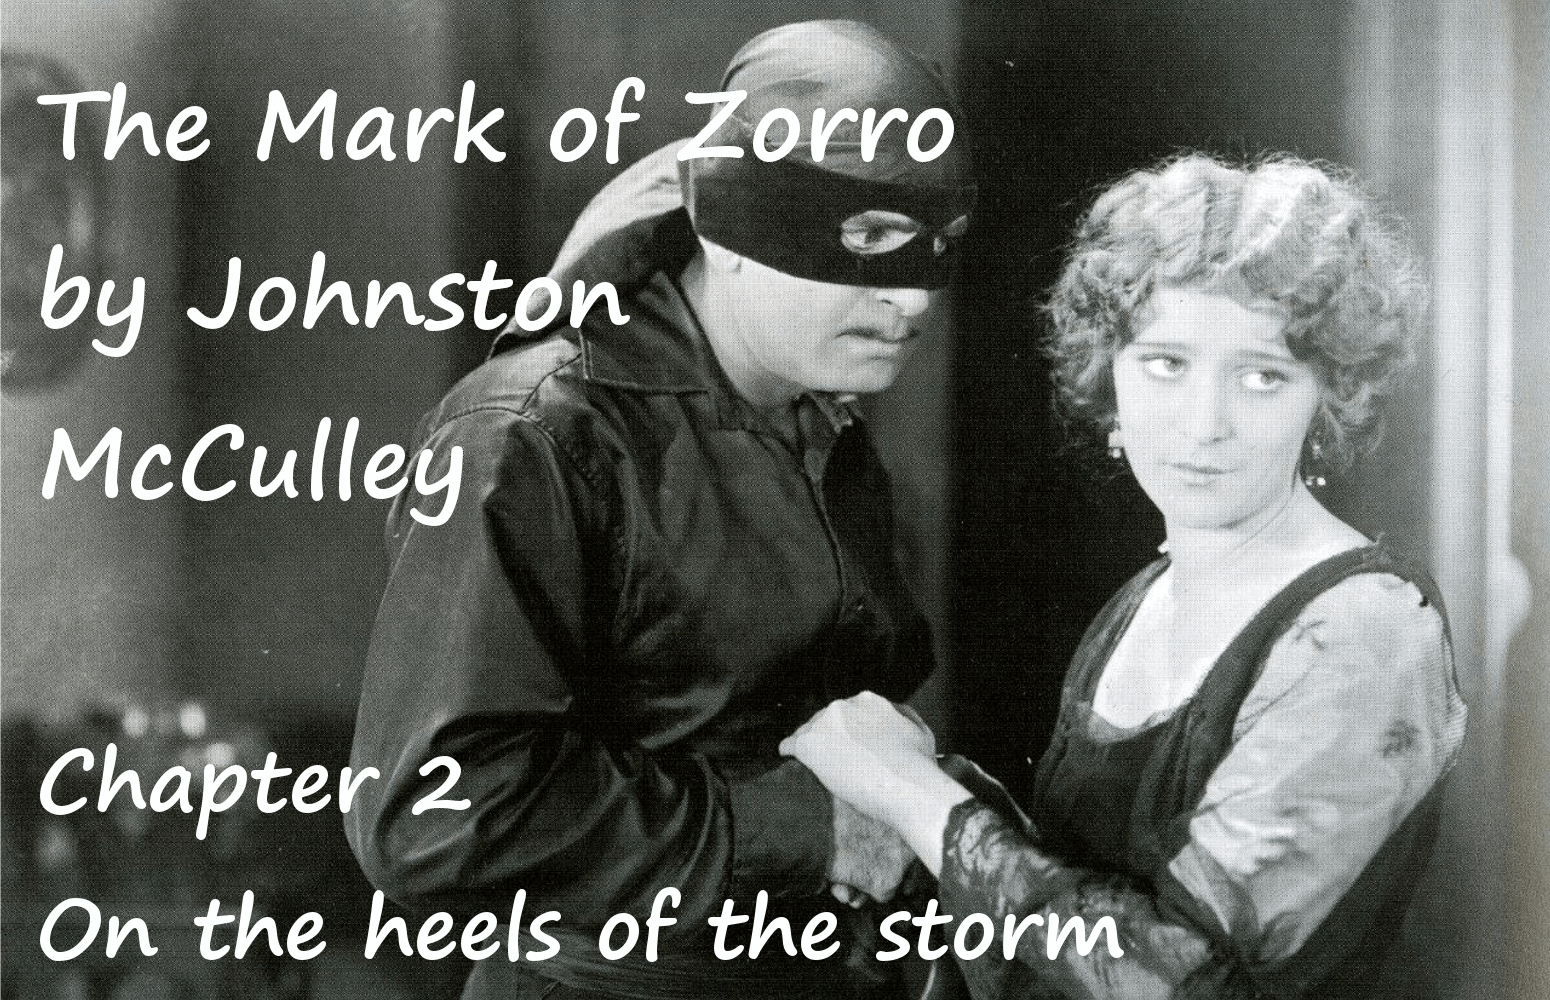 The Mark of Zorro chapter 2 On the heels of the storm by Johnston McCulley